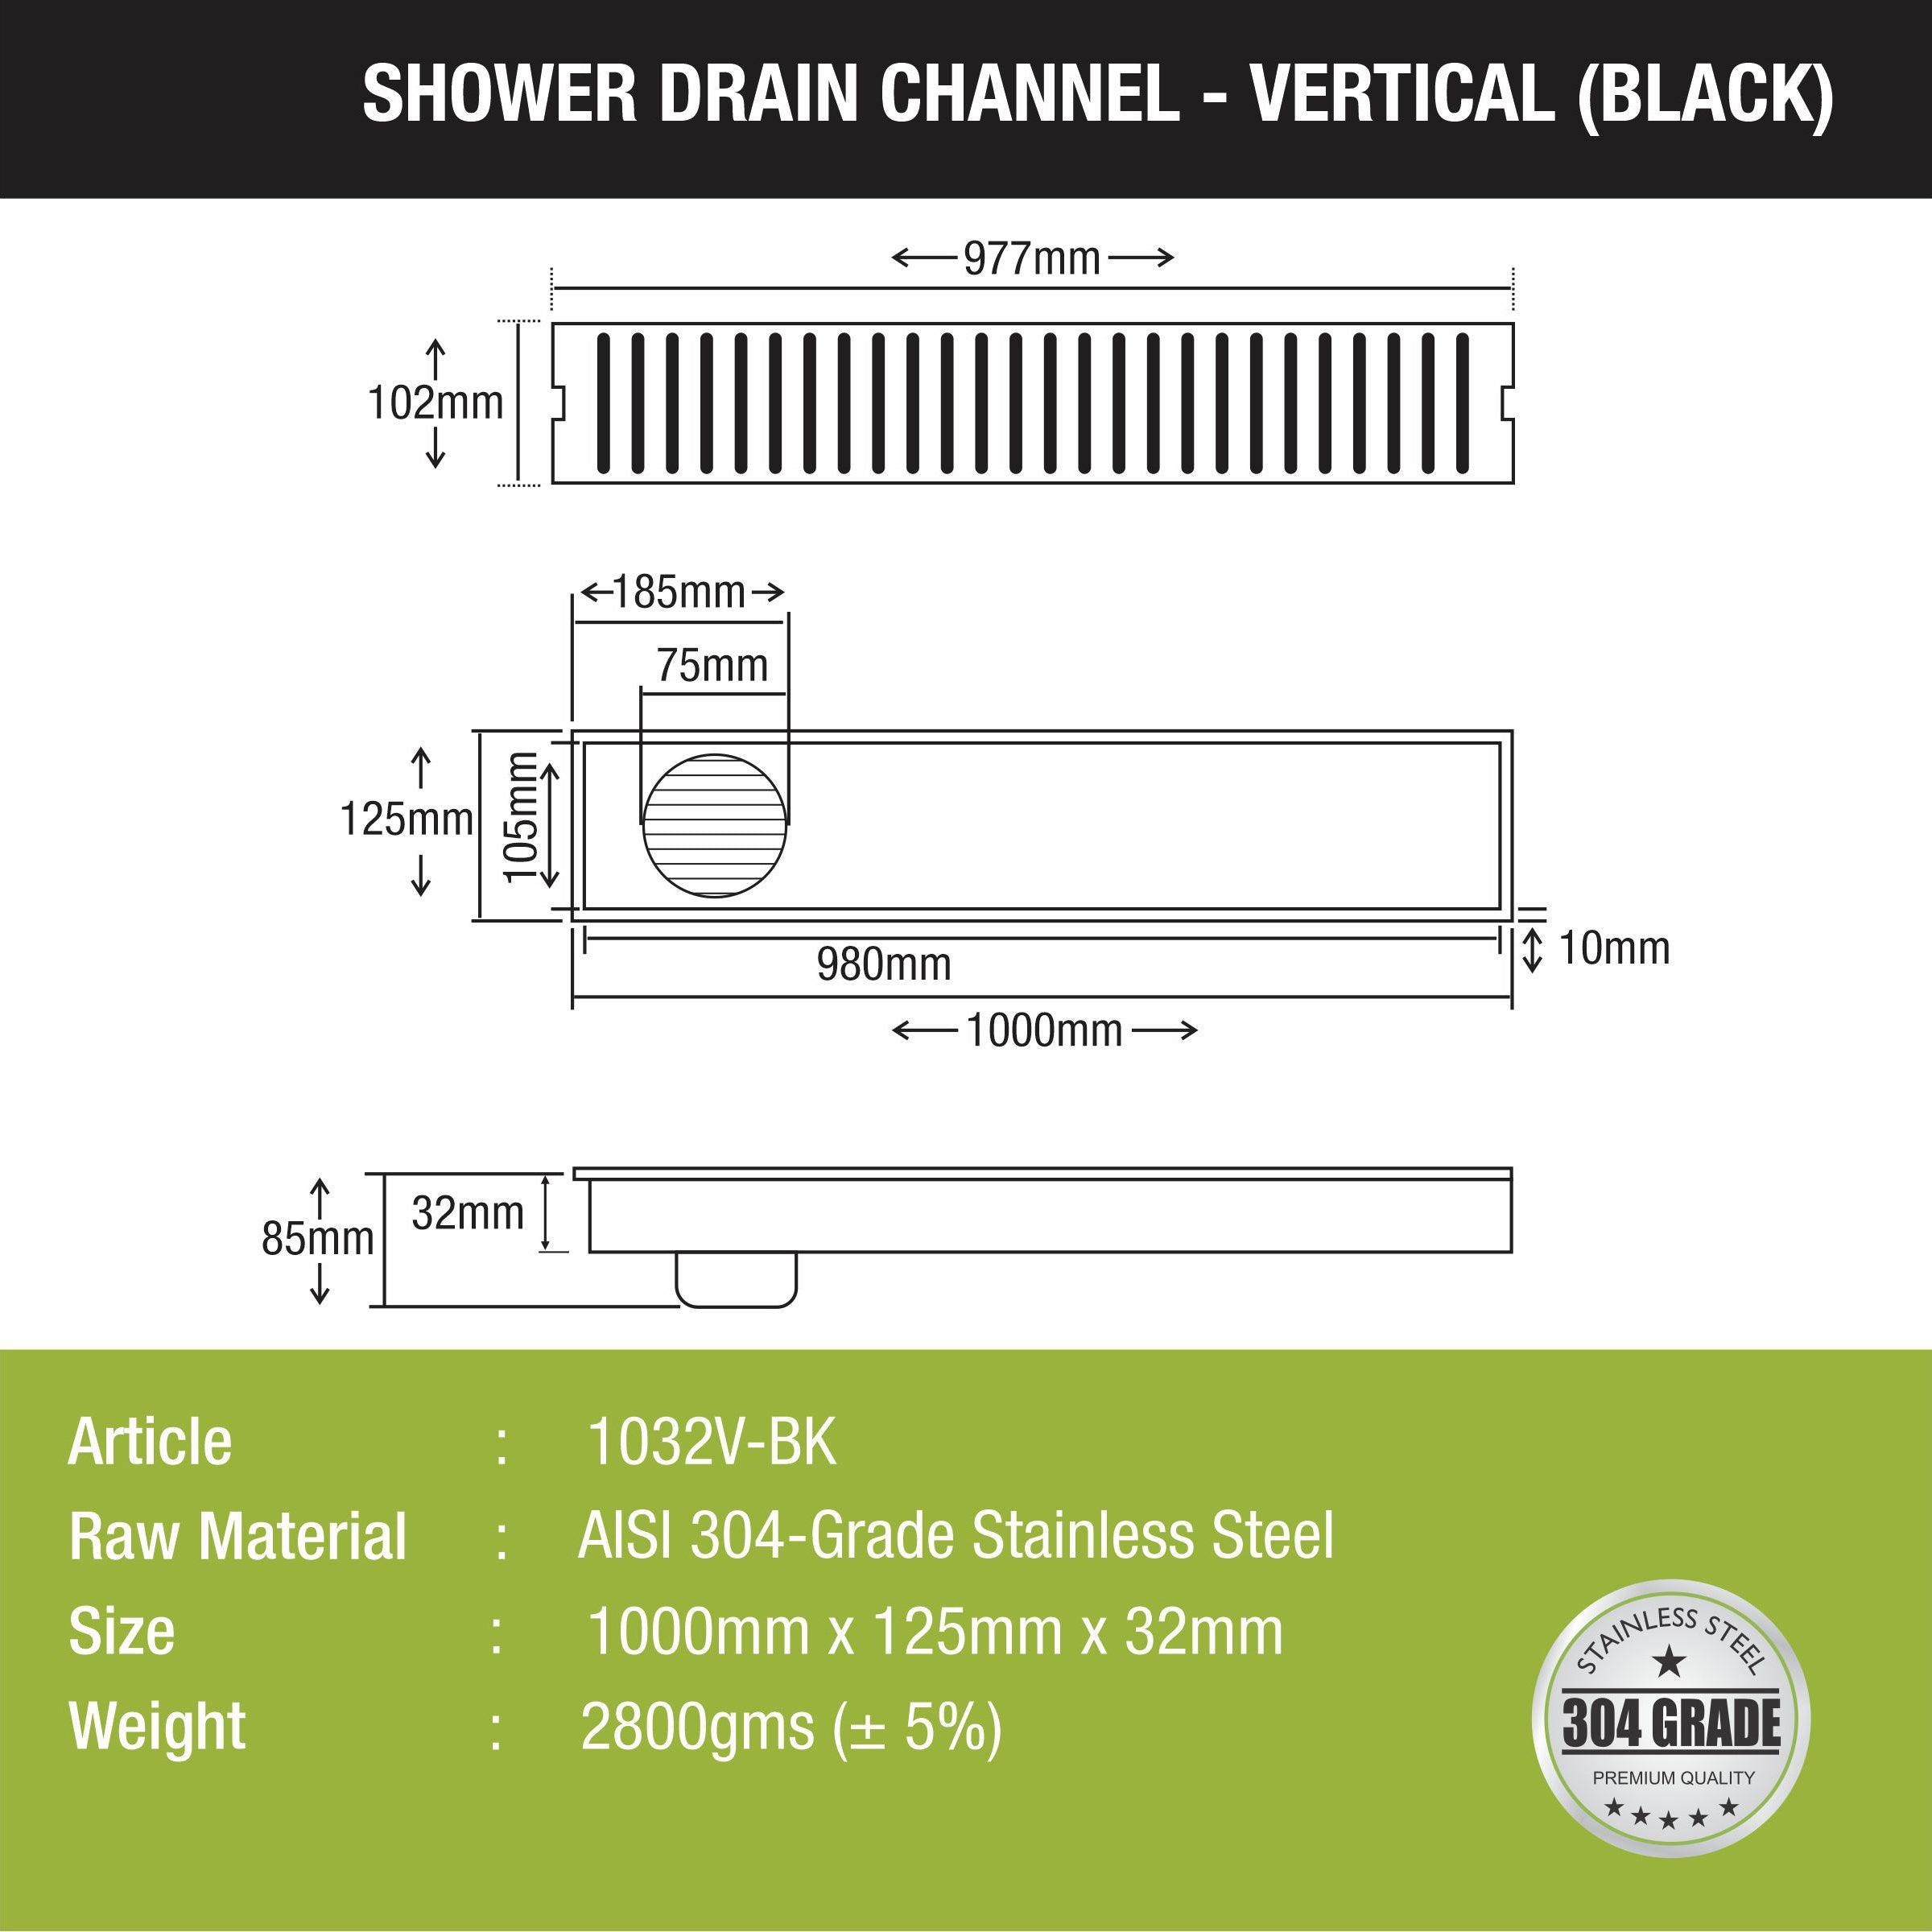 Vertical Shower Drain Channel - Black (40 x 5 Inches) size and measurement 